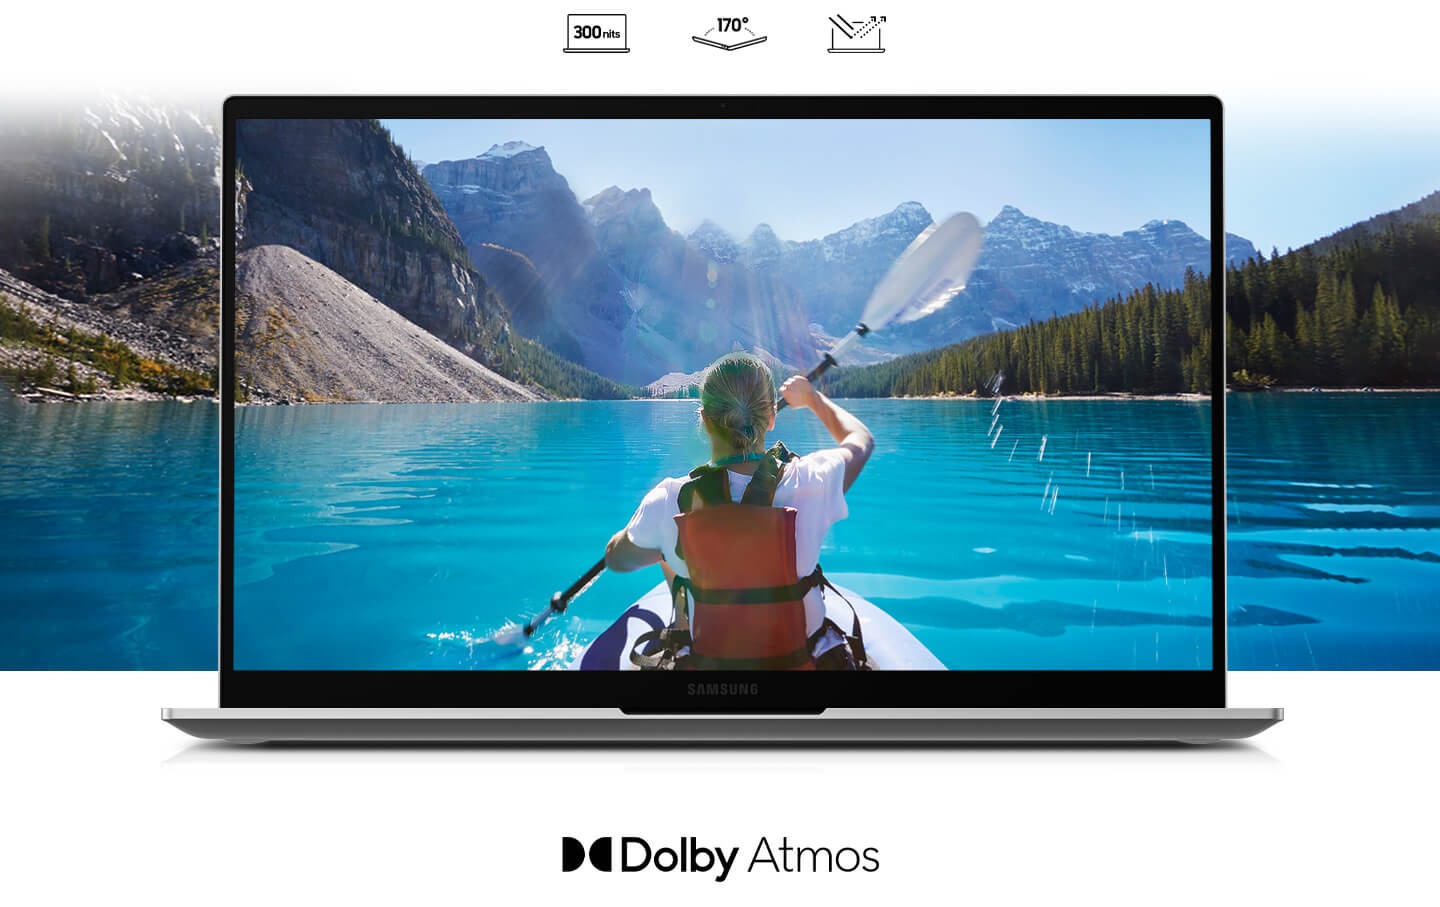 A girl with a ponytail riding in a canoe, paddles the river surrounded by mountains. The extensive river and mountain view are applied on both inside and outside of the laptop display. Dolby Atmos logo written at the bottom.